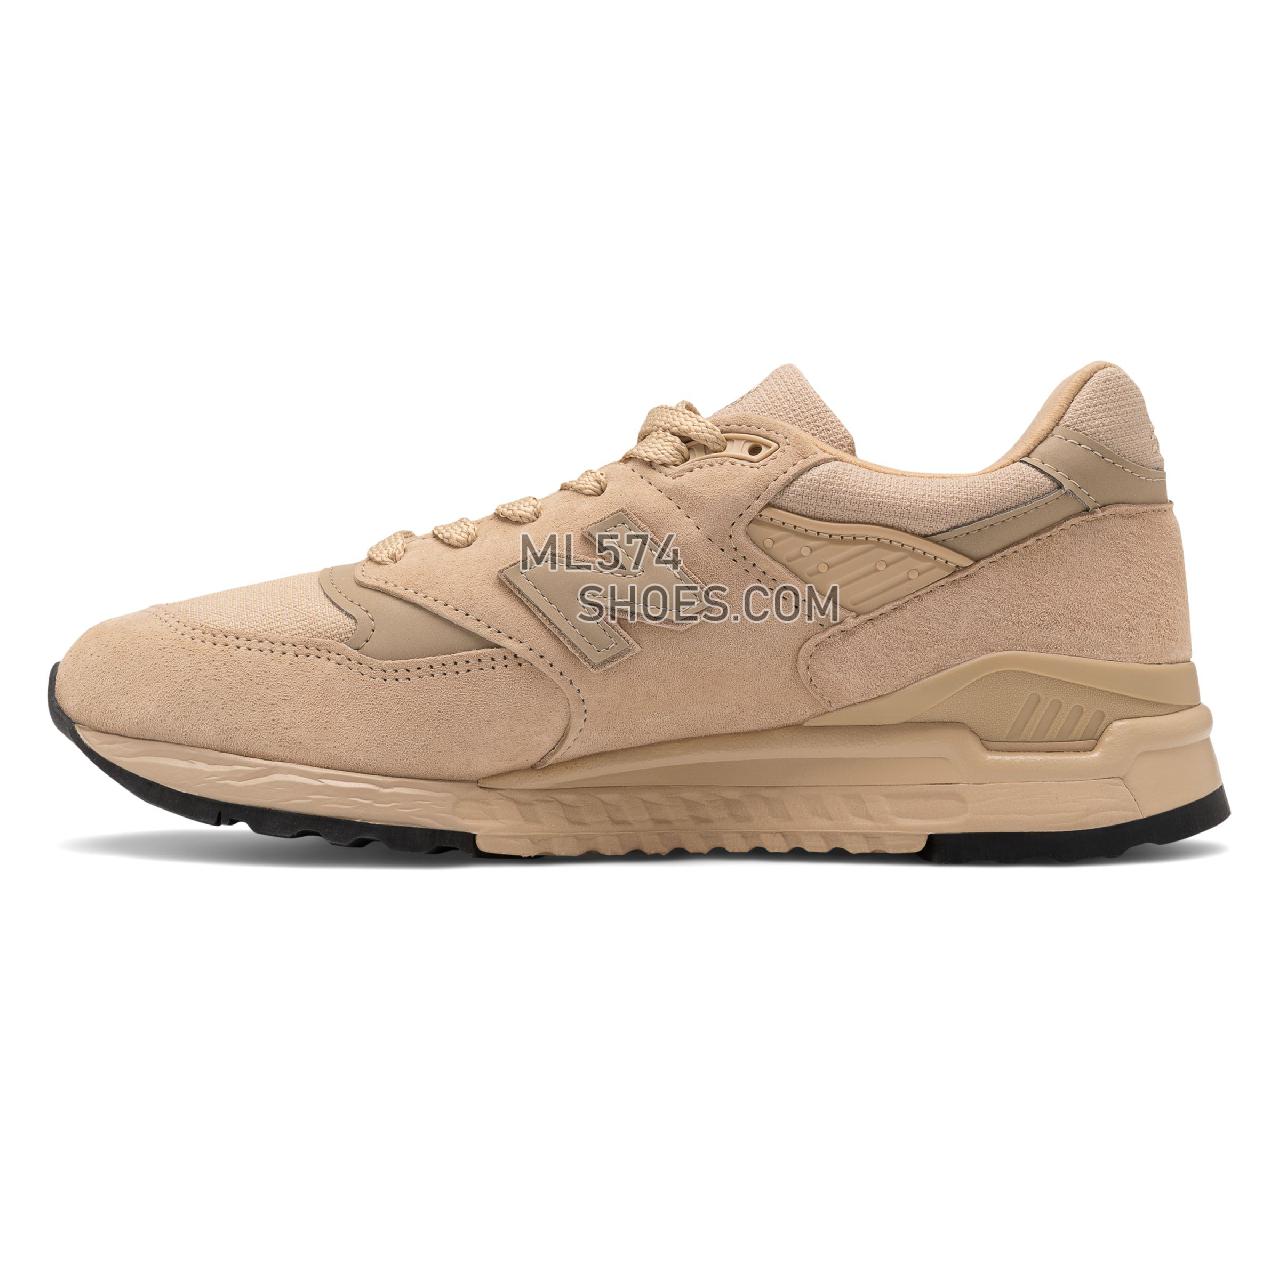 New Balance Made in US 998 - Men's Made in USA And UK Sneakers - Tan with Brown - M998BLC